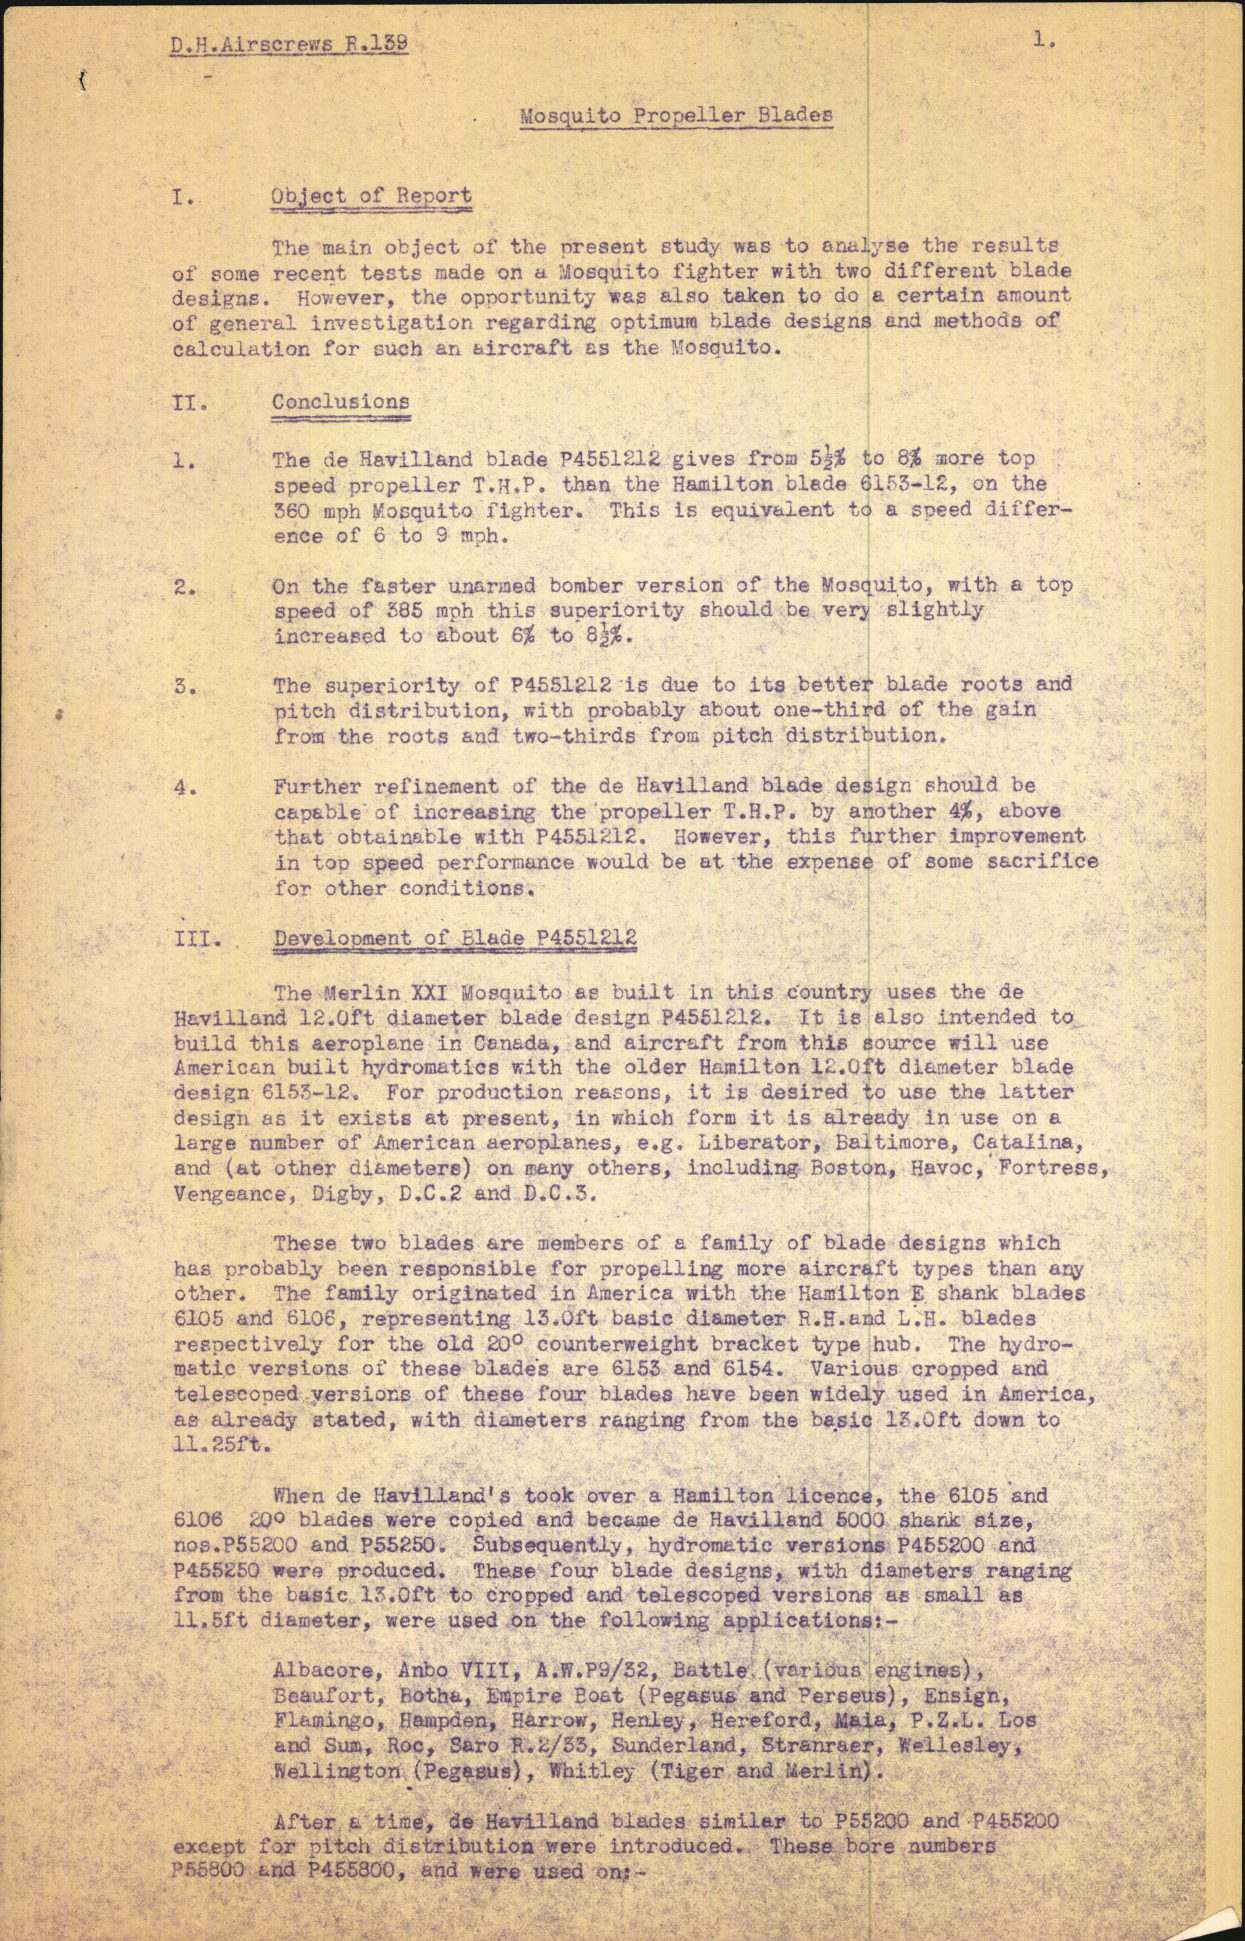 Sample page 5 from AirCorps Library document: Mosquito Propeller Blades